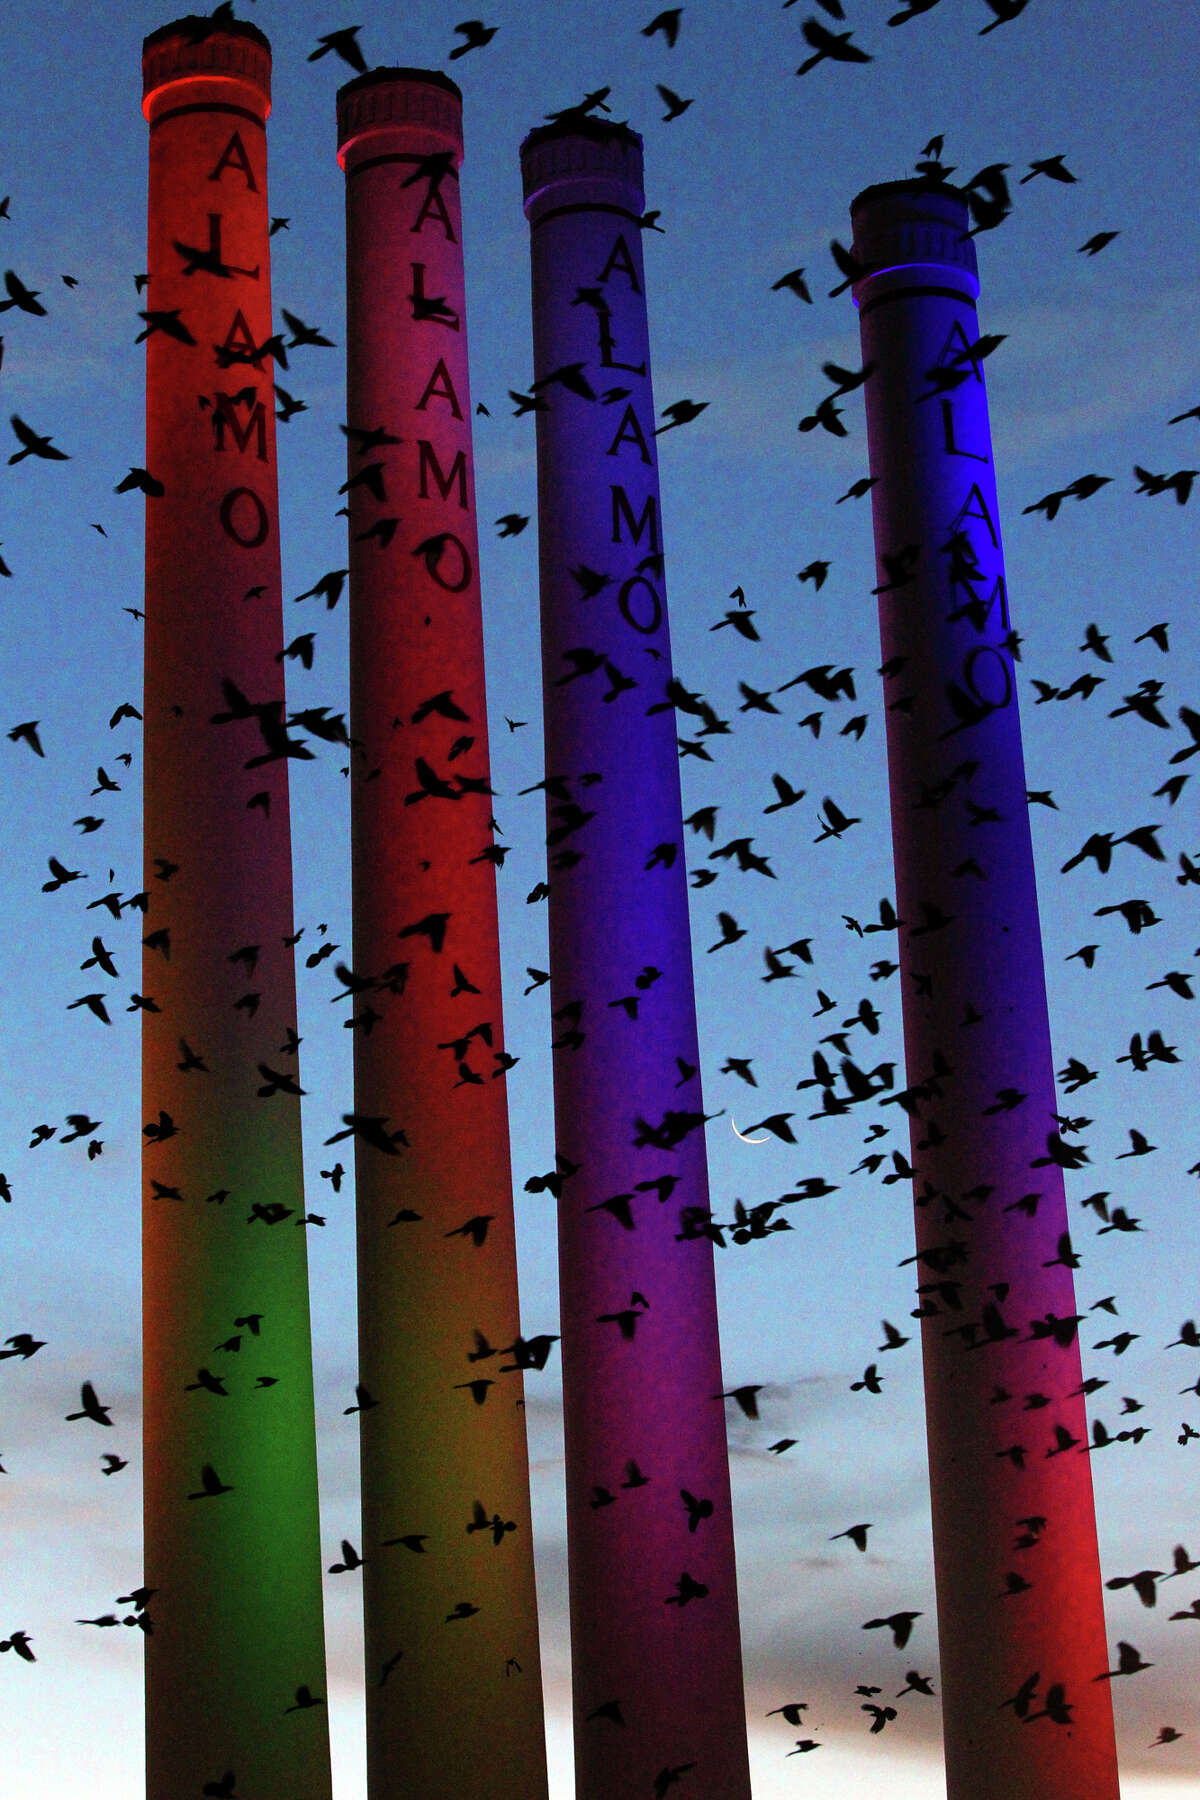 A flock birds flies in front of the smokestacks at the Alamo Quarry Market Tuesday Morning December 11, 2012.